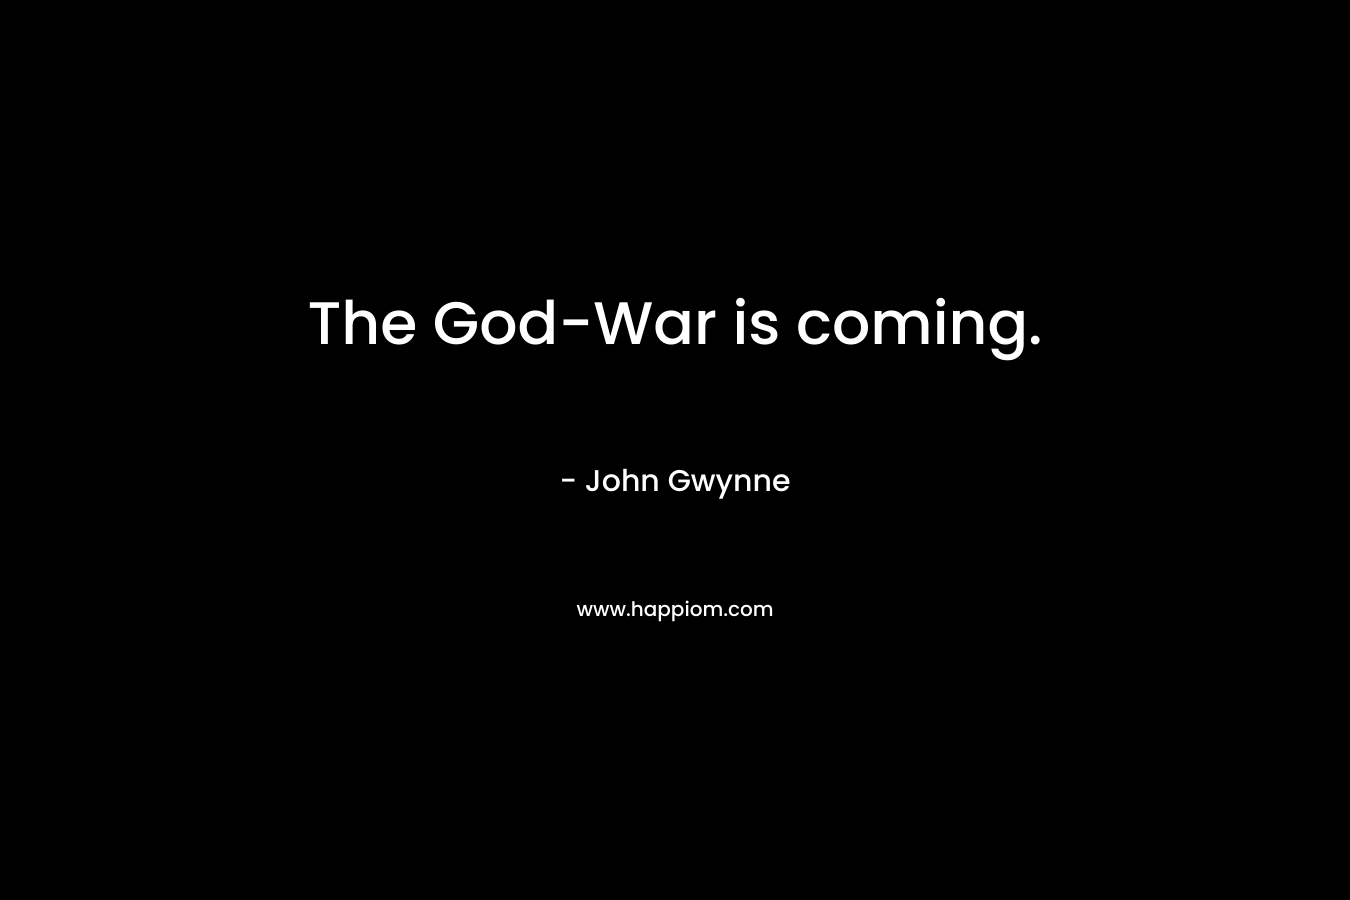 The God-War is coming.